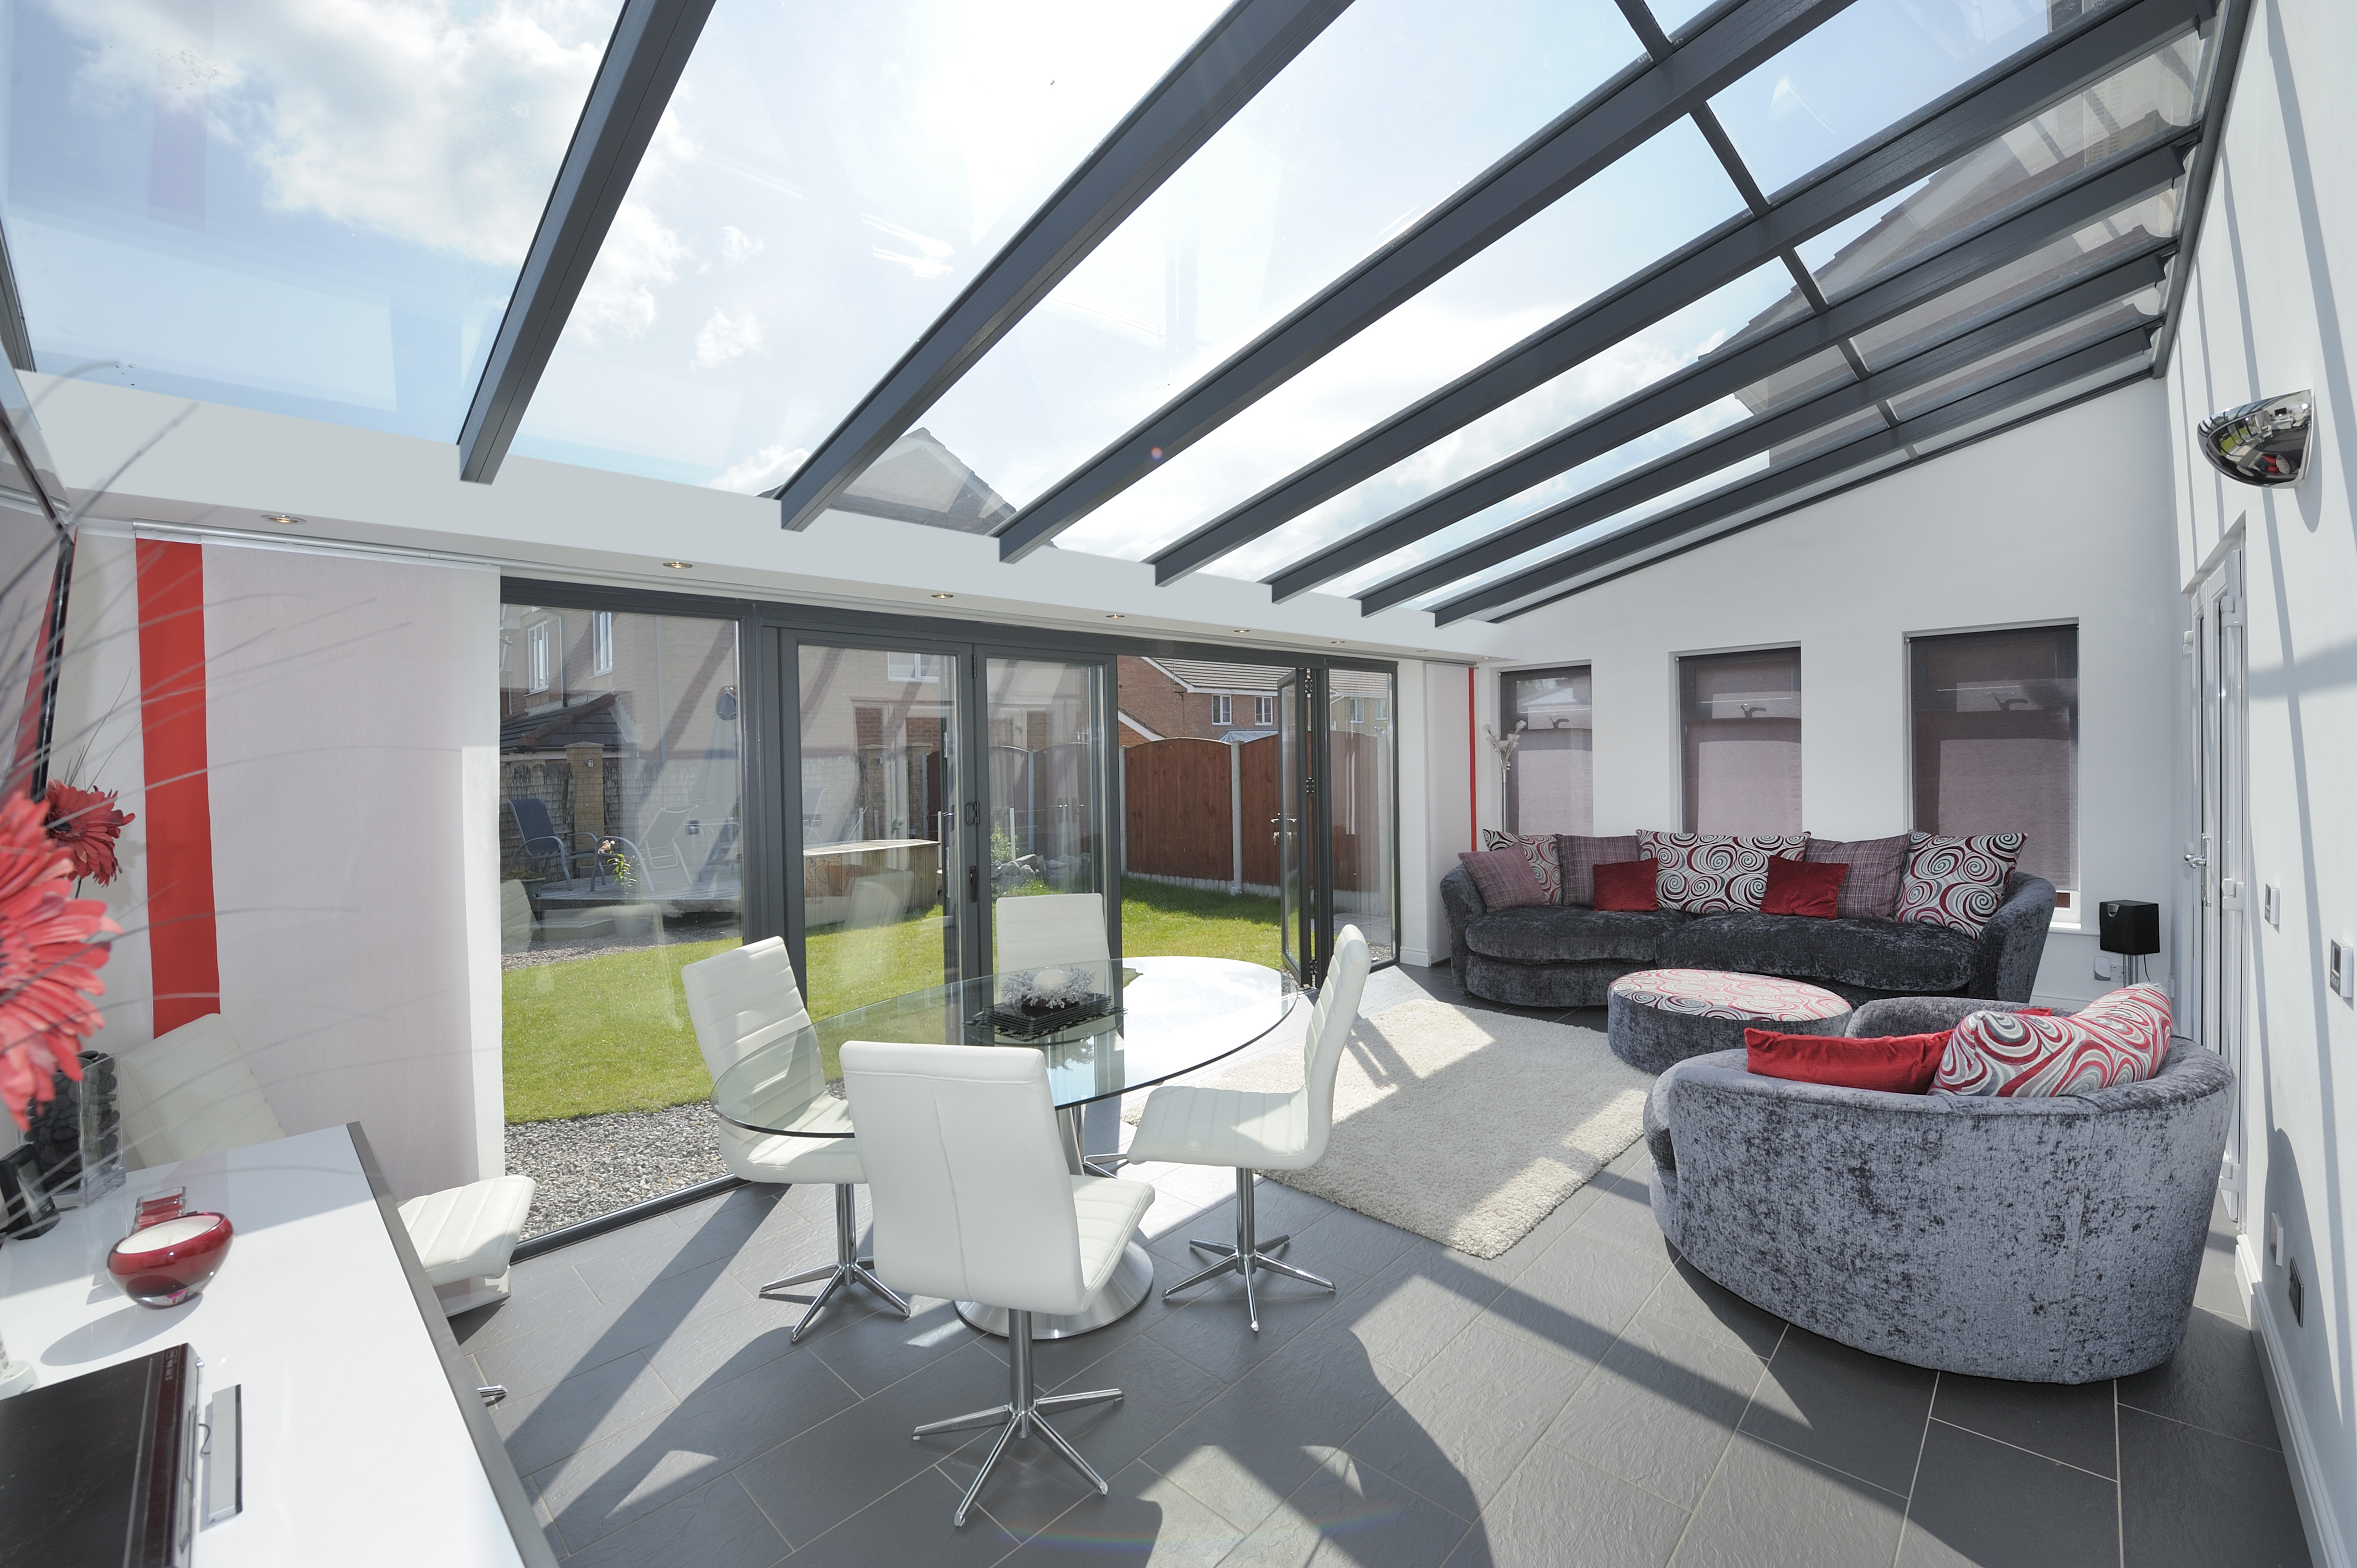 Modern and immaculate Livin room conservatory example.